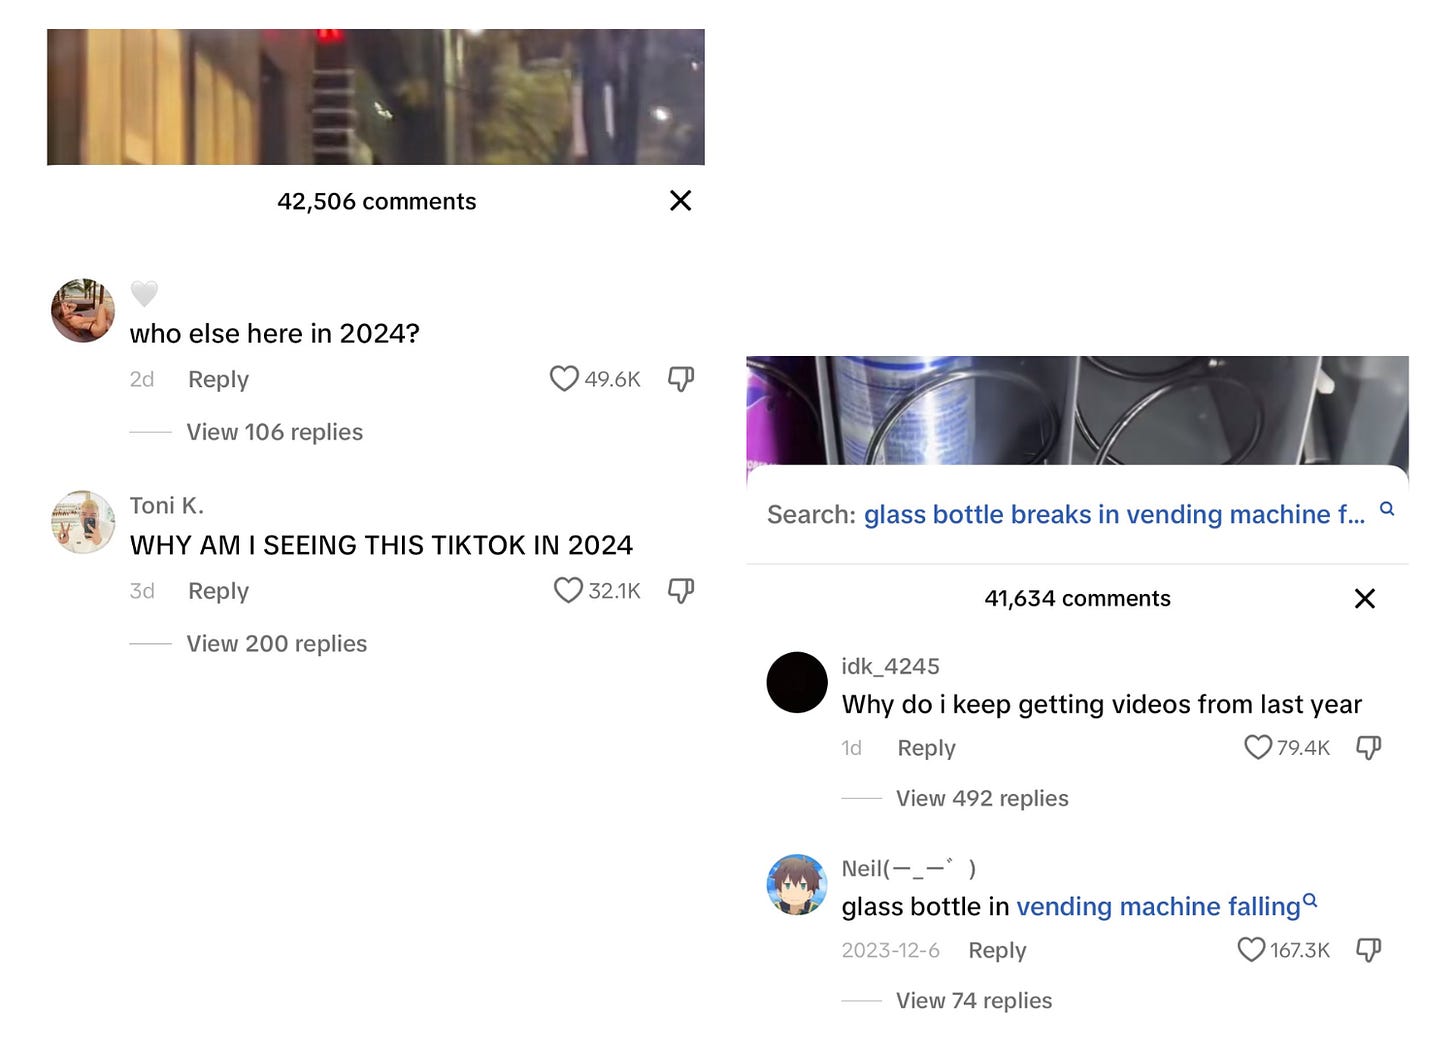 Comments on TikToks from 2023 saying "Who else is here in 2024" and "why do i keep getting videos from last year"